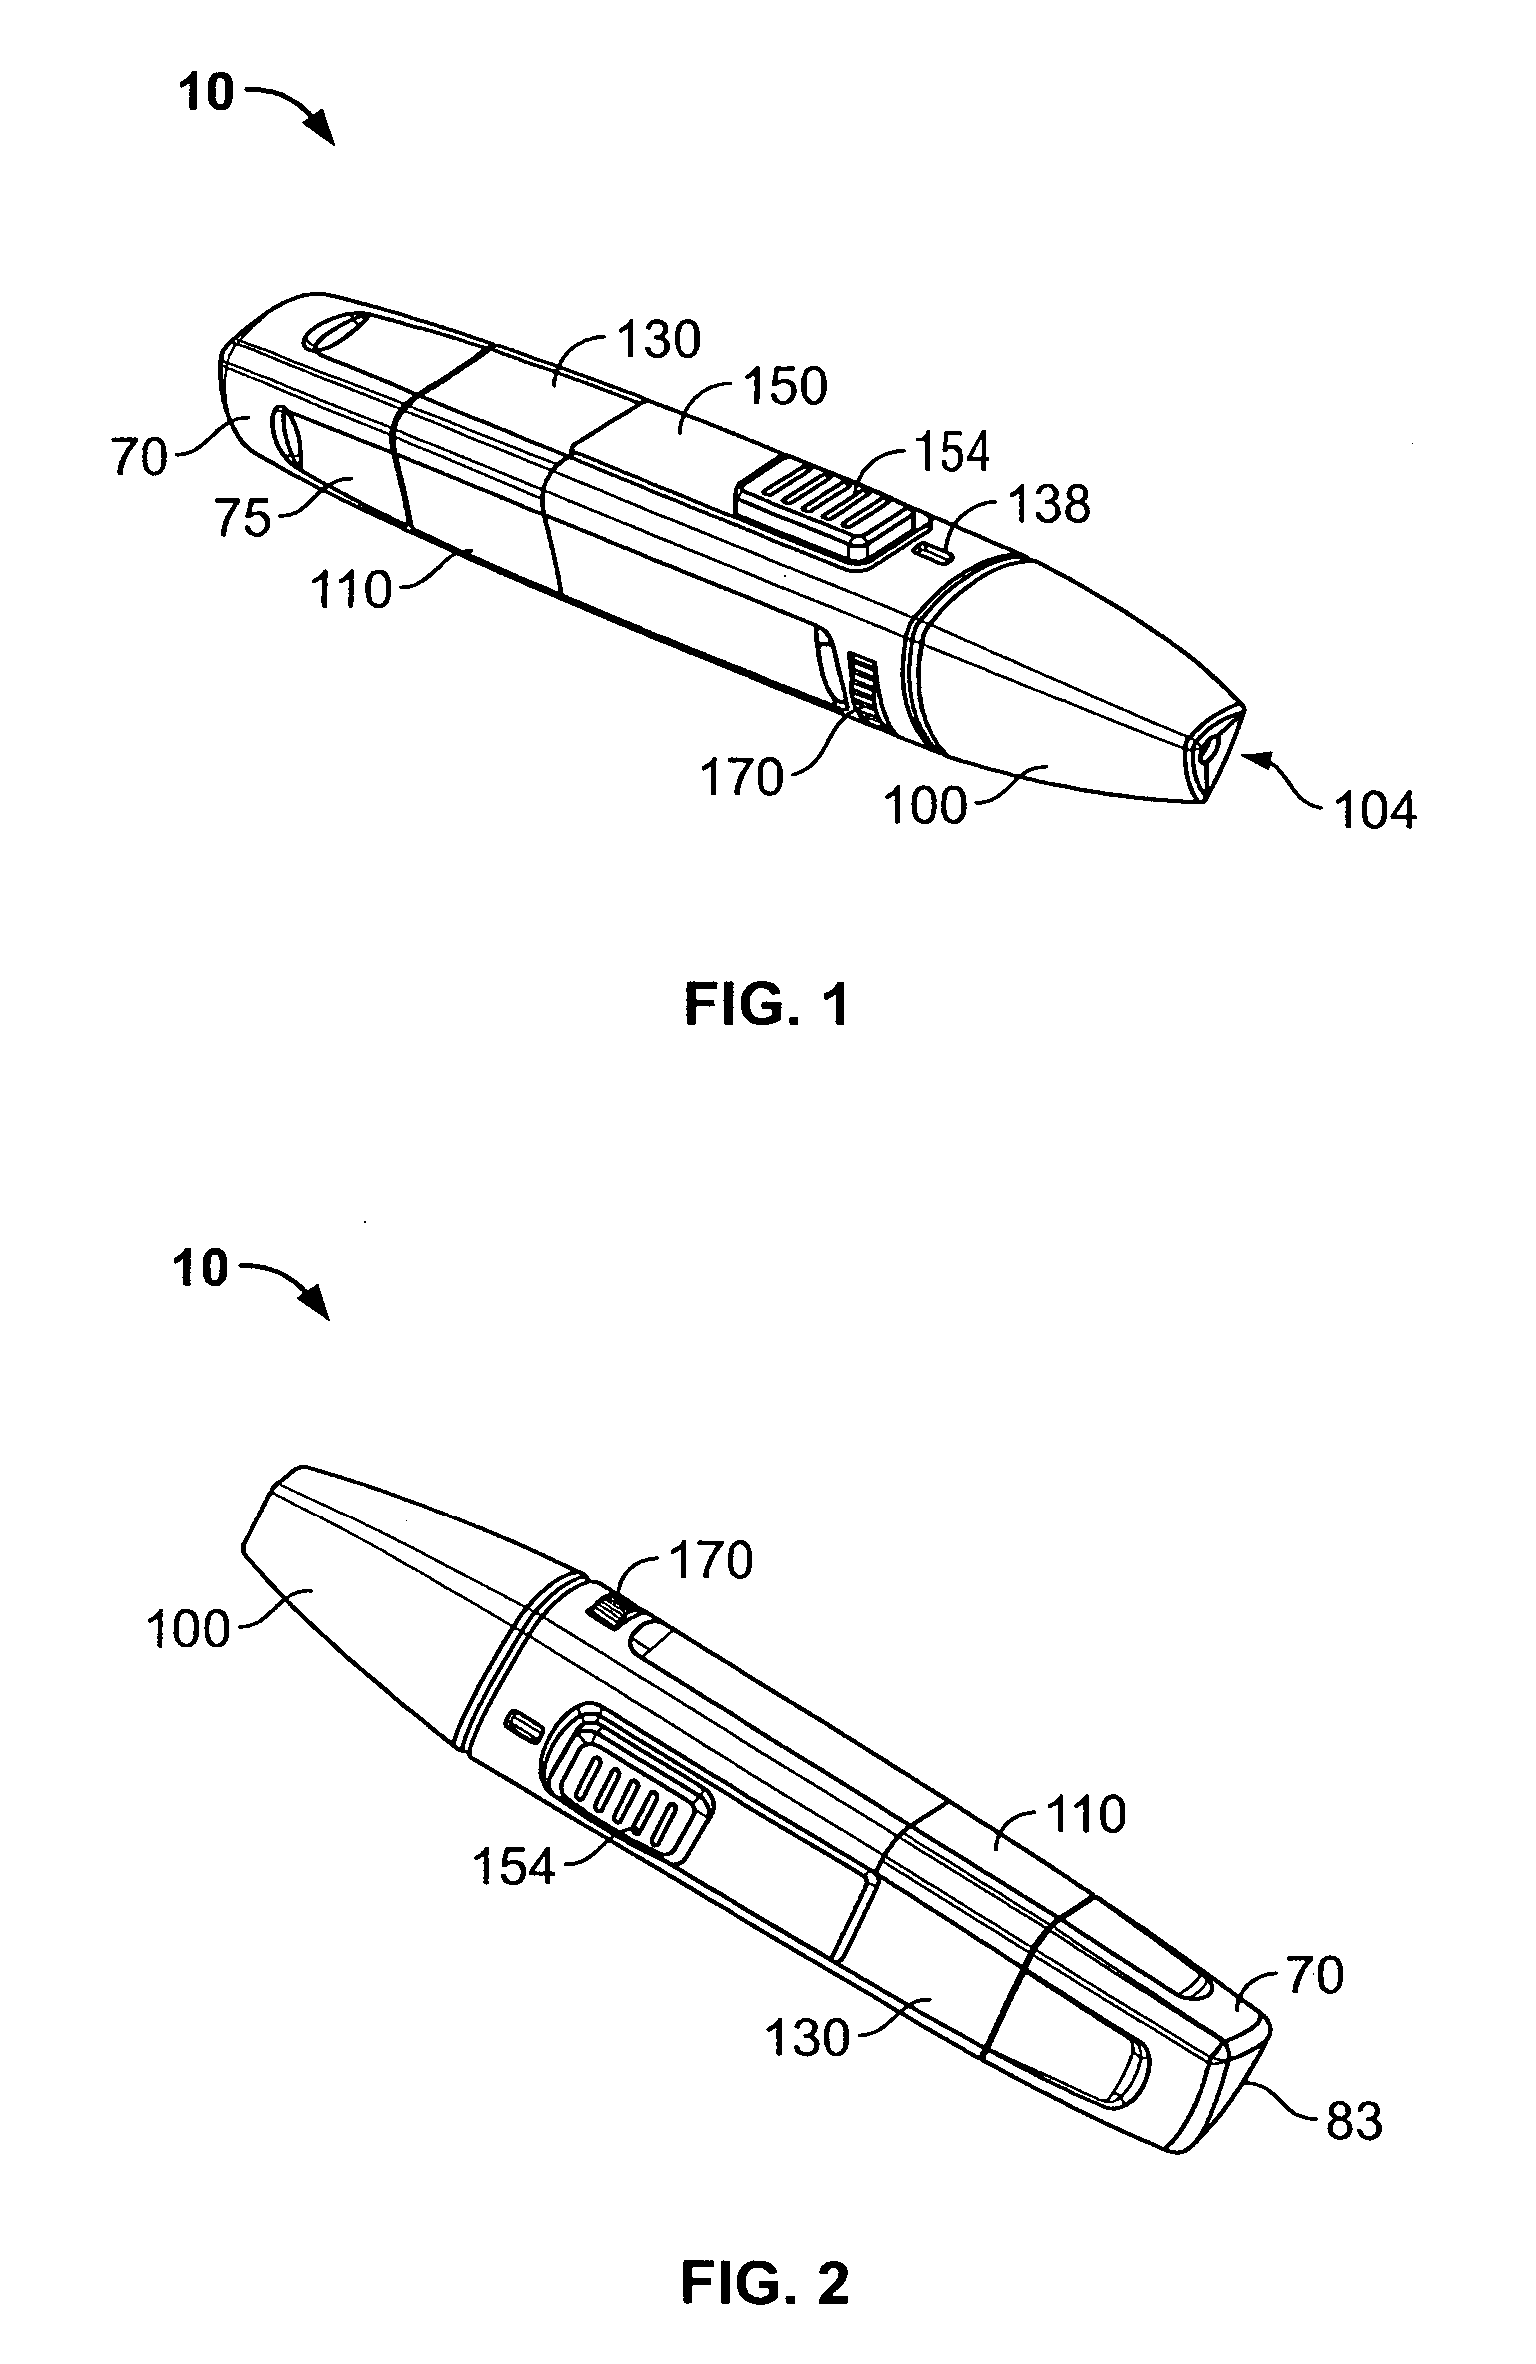 Lancet device and method